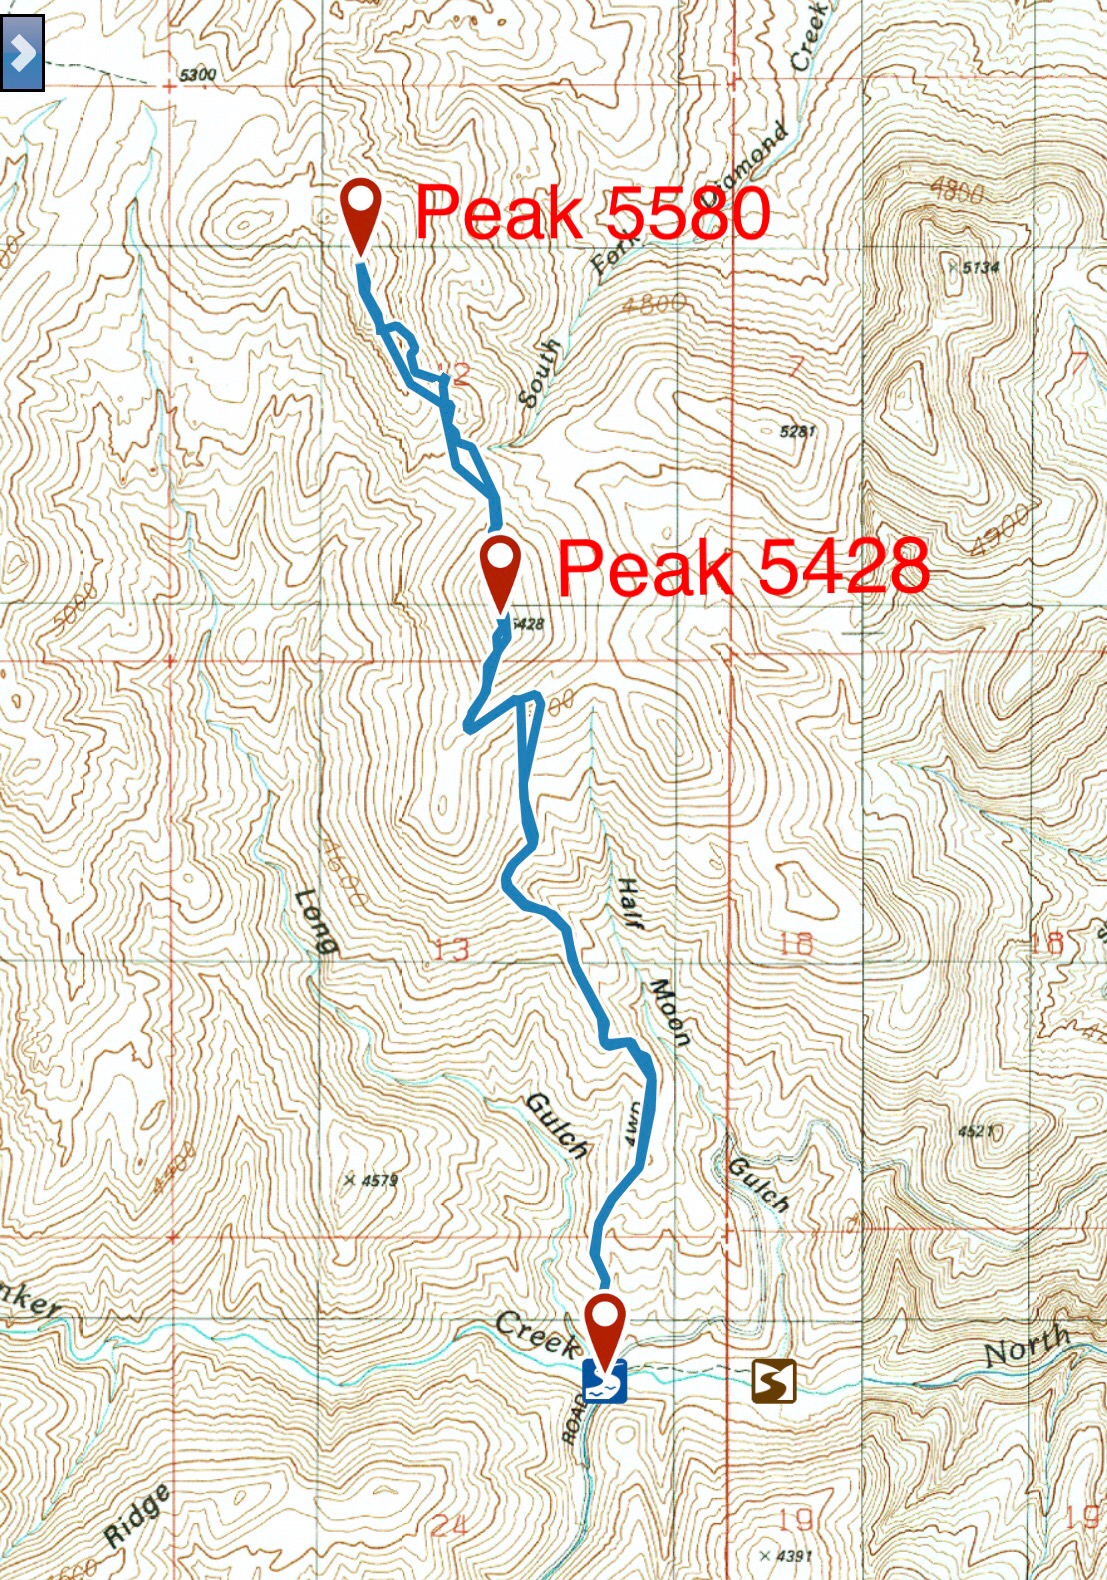 My GPS Track for Peaks 5580 and 5428.